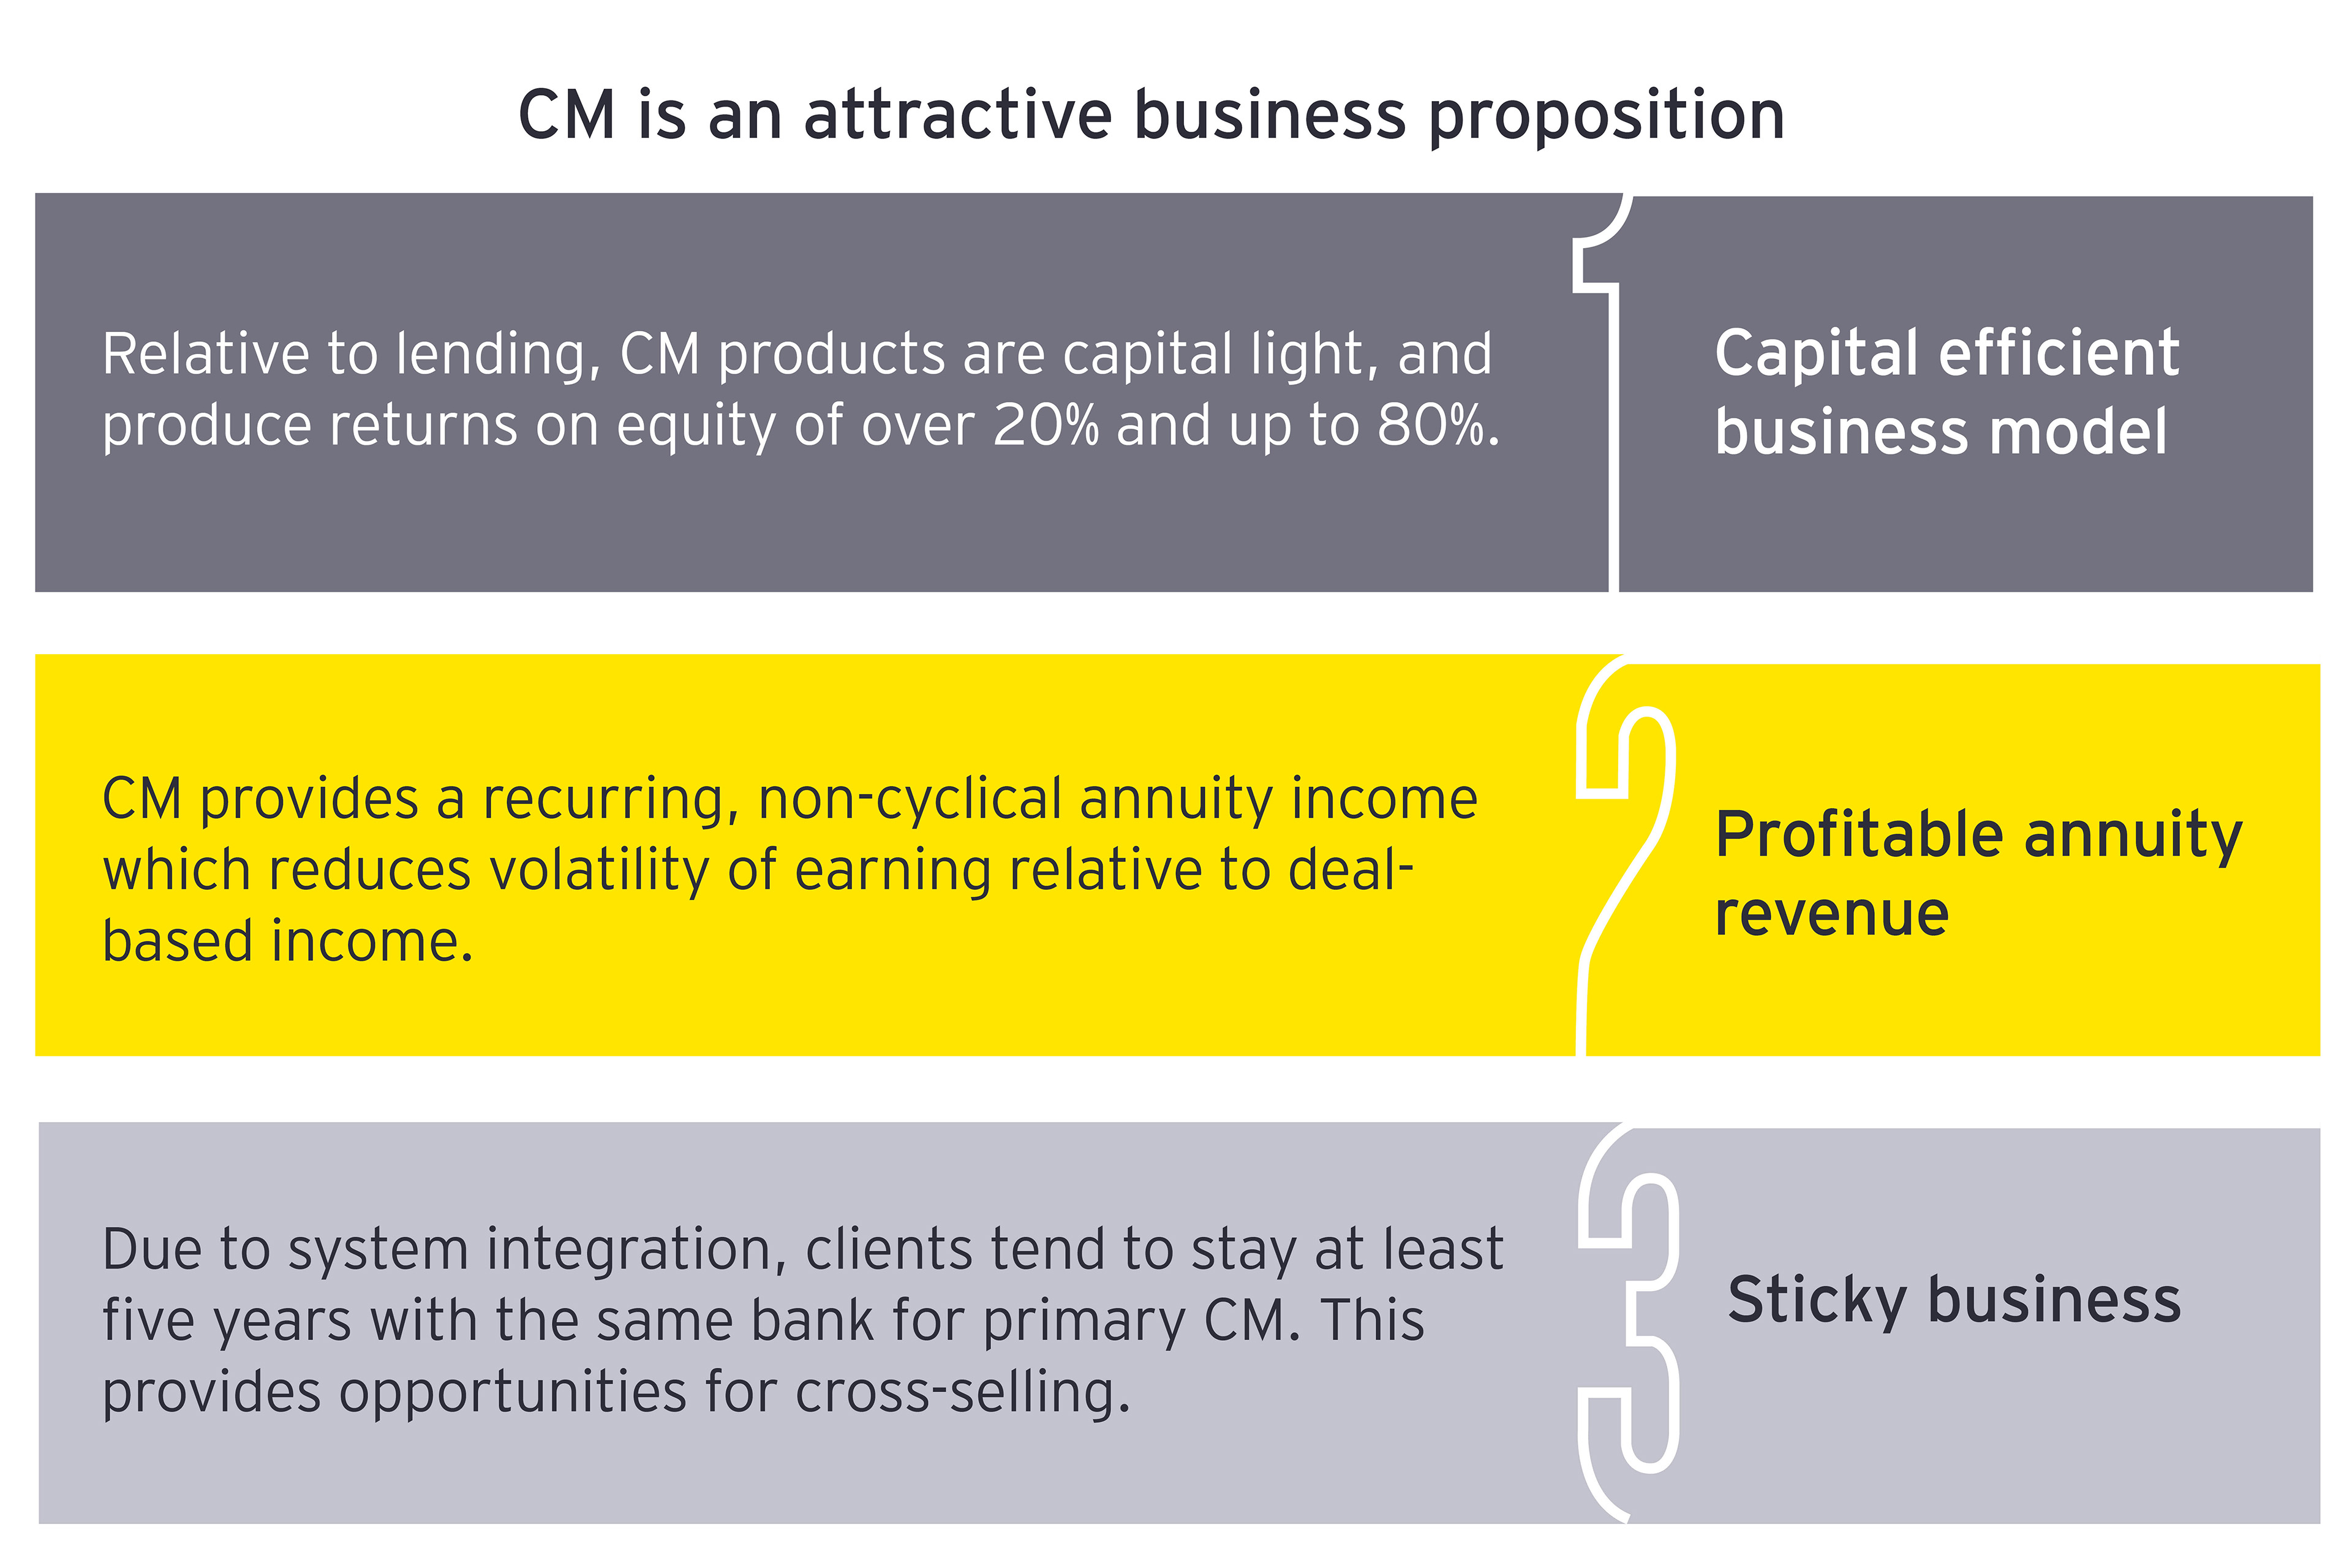 CM is an attractive business proposition